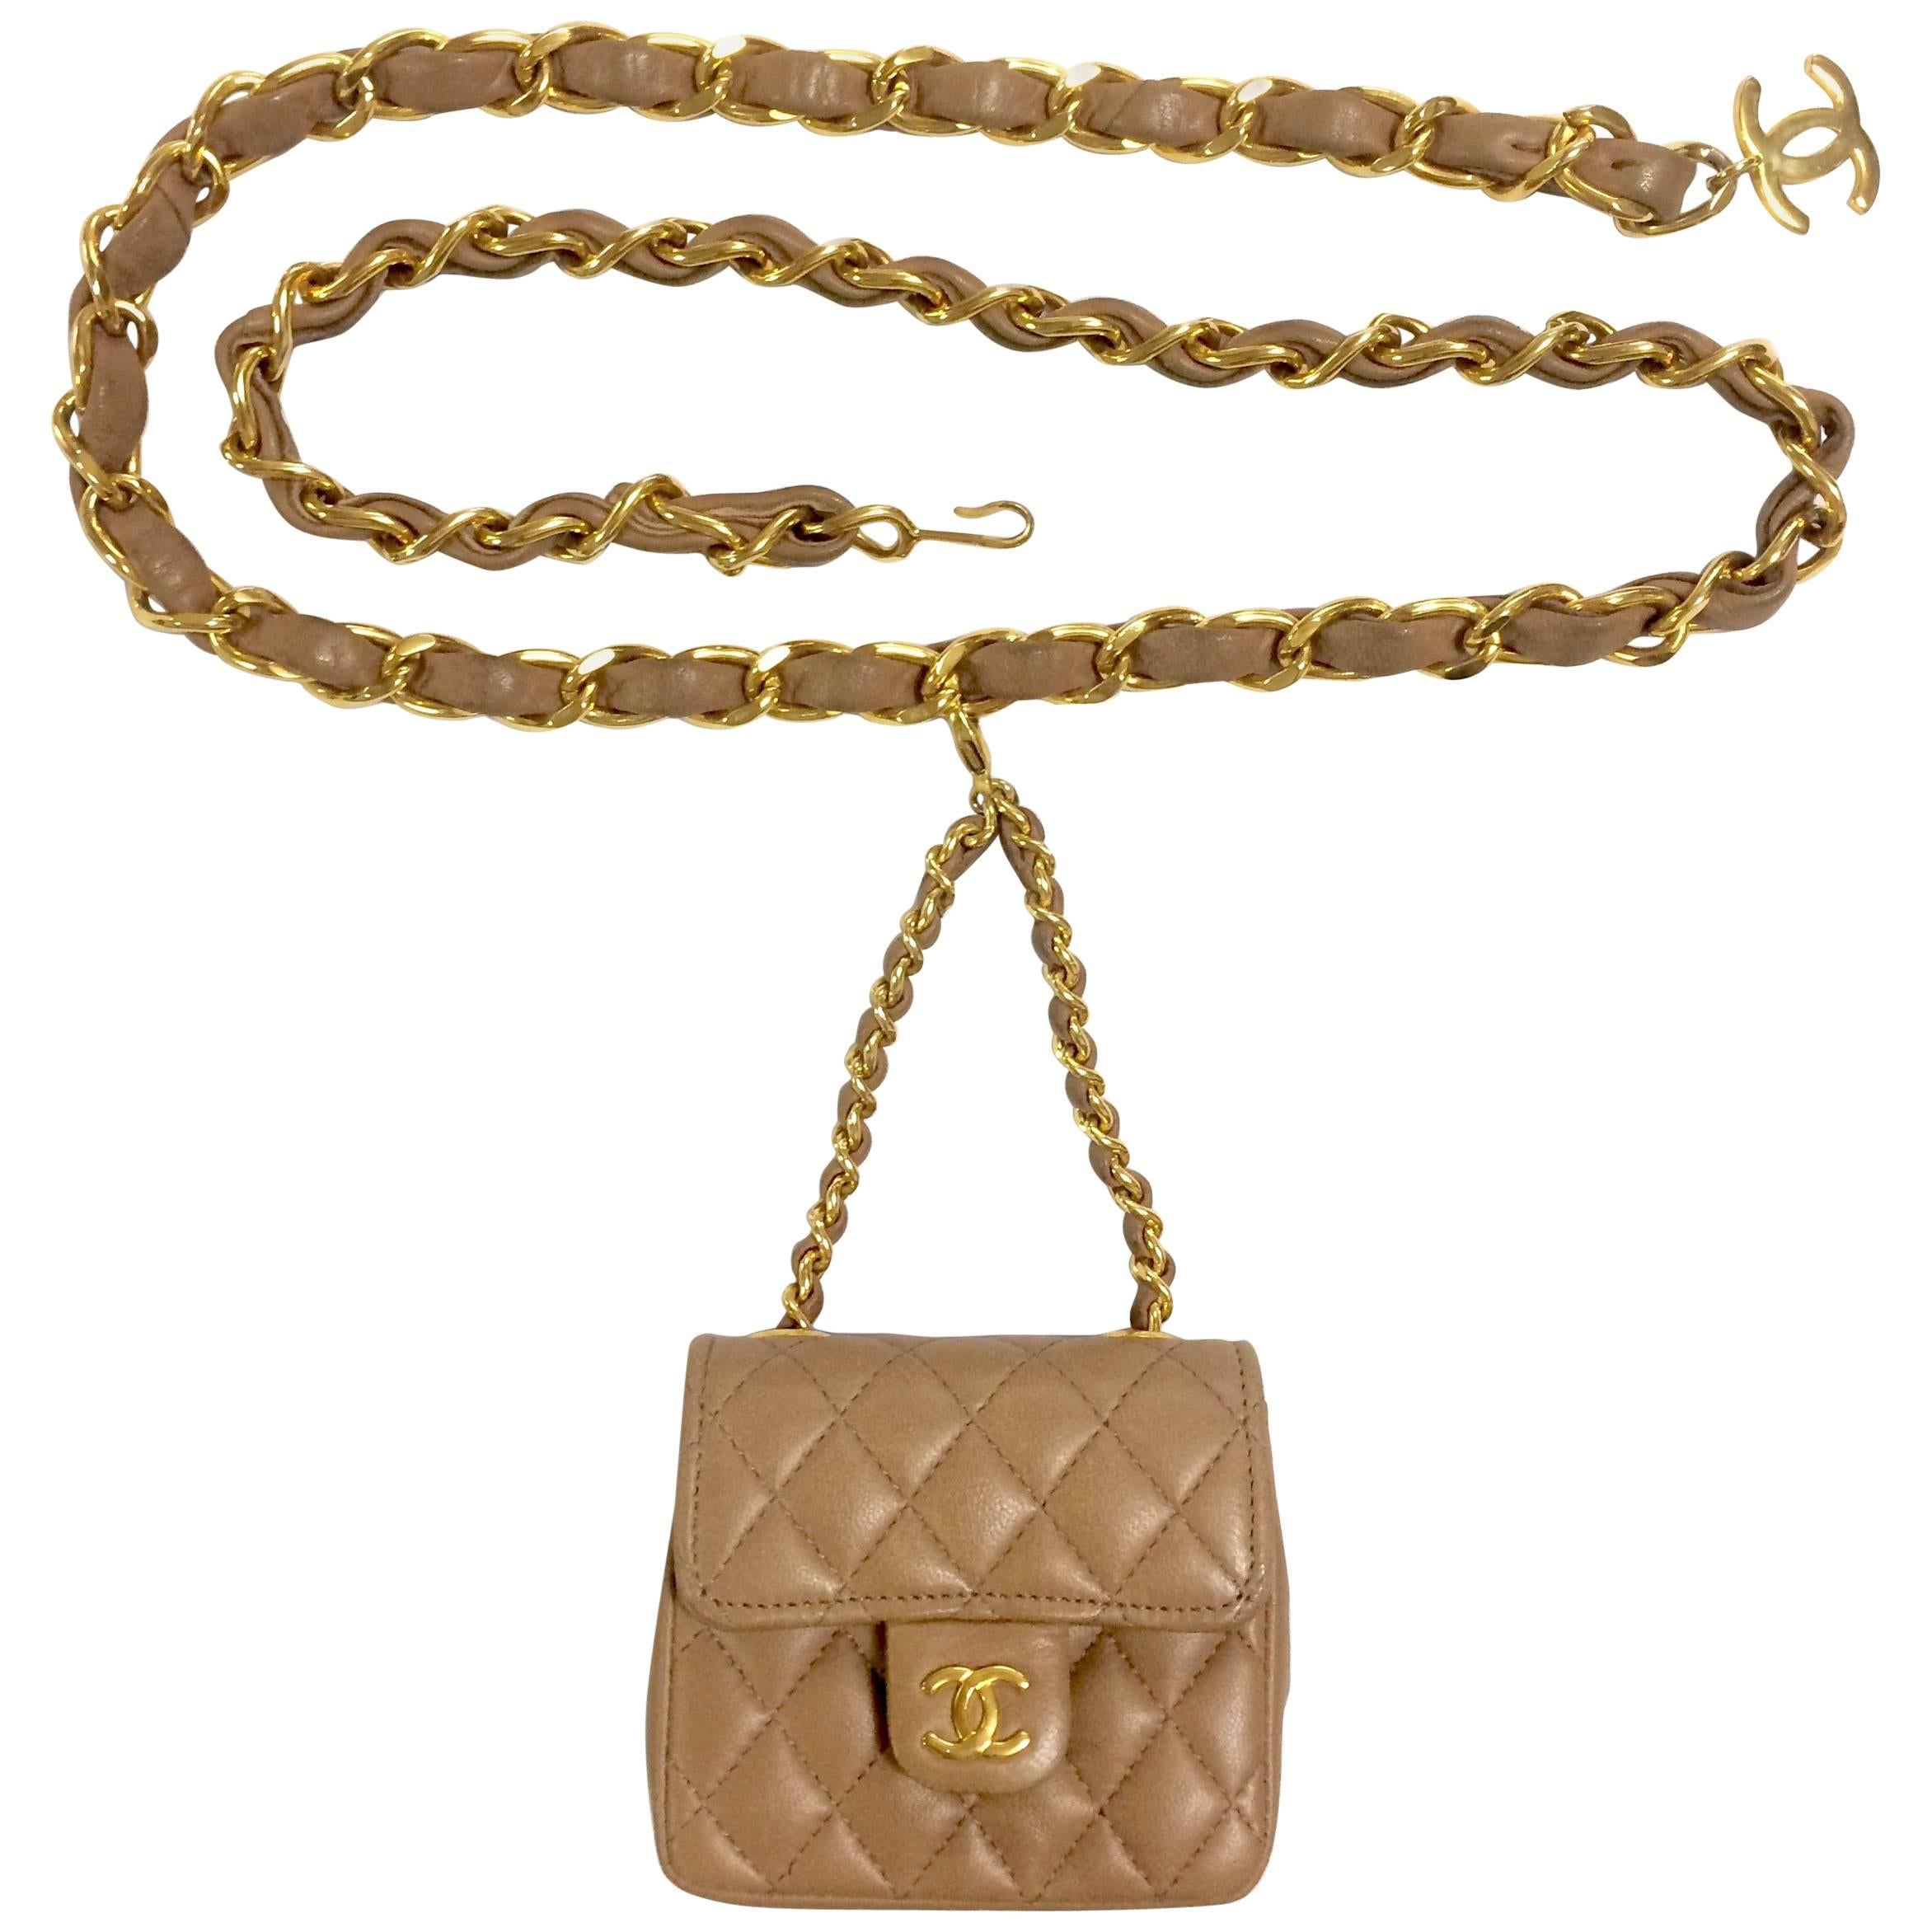 Vintage CHANEL brown lambskin mini 2.55 bag charm chain leather belt with CC.